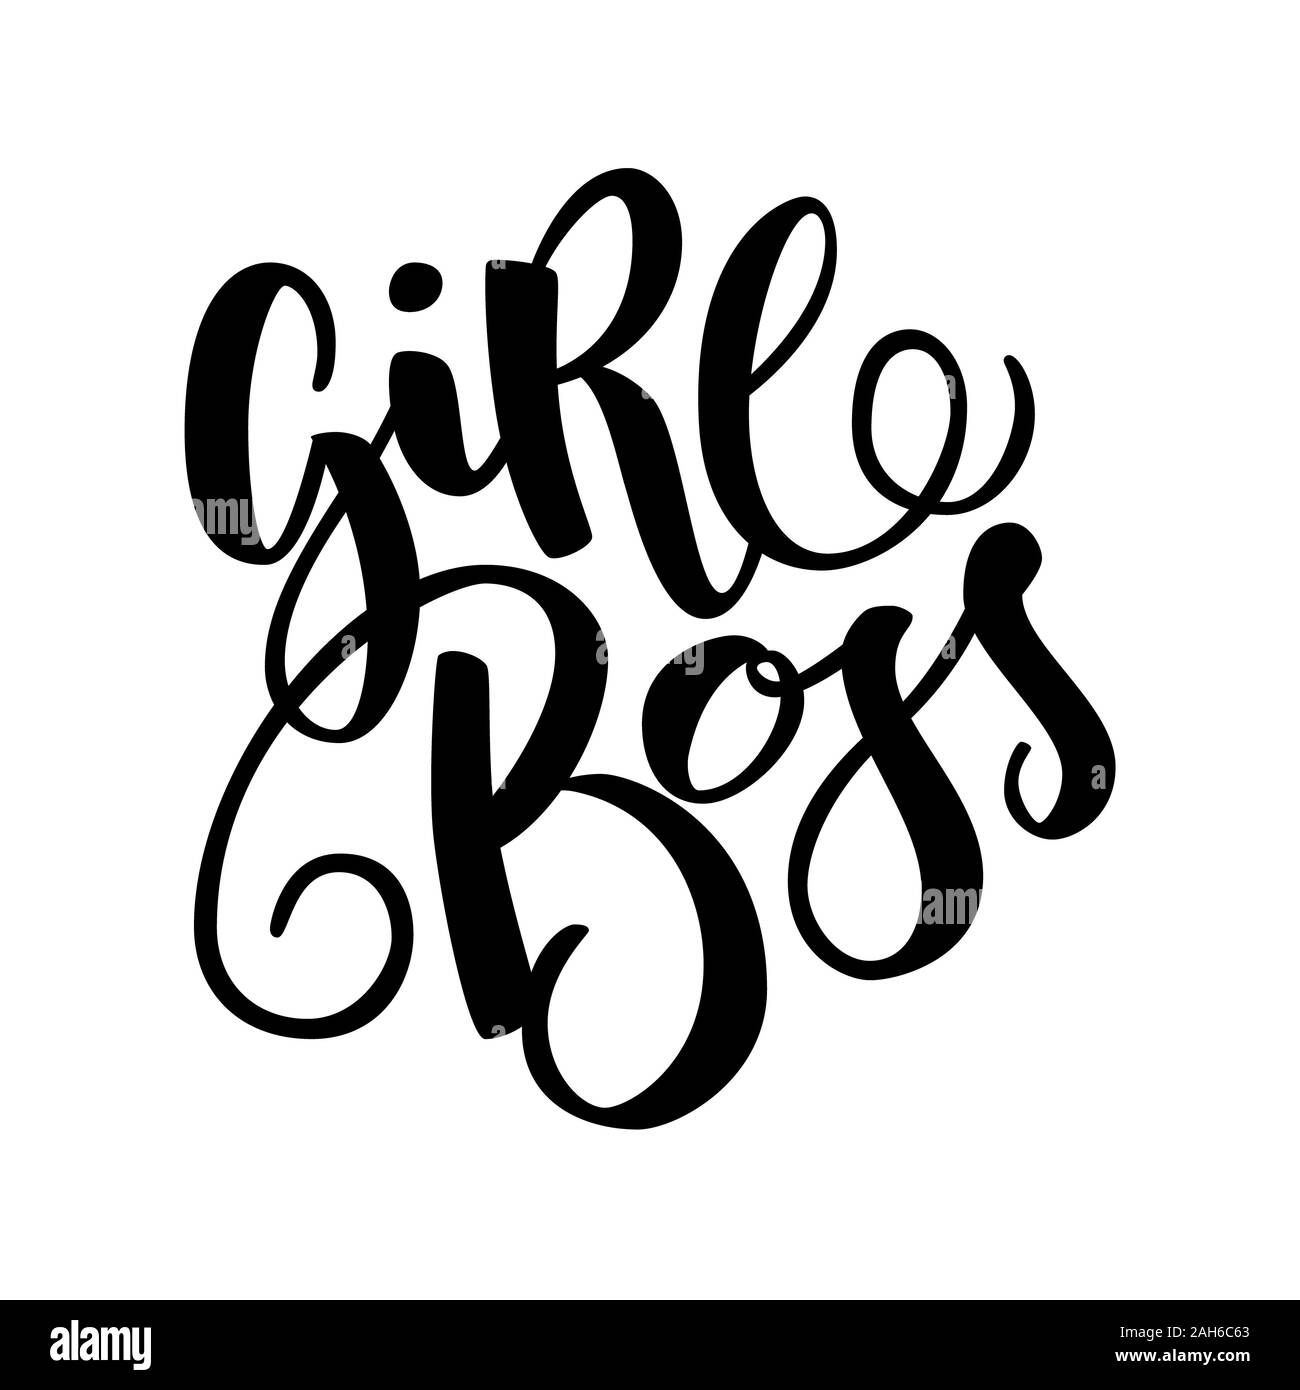 The calligraphic quote Girl boss handwritten of black ink isolated on a white background. It can be used for sticker, patch, phone case, poster, t-shi Stock Photo